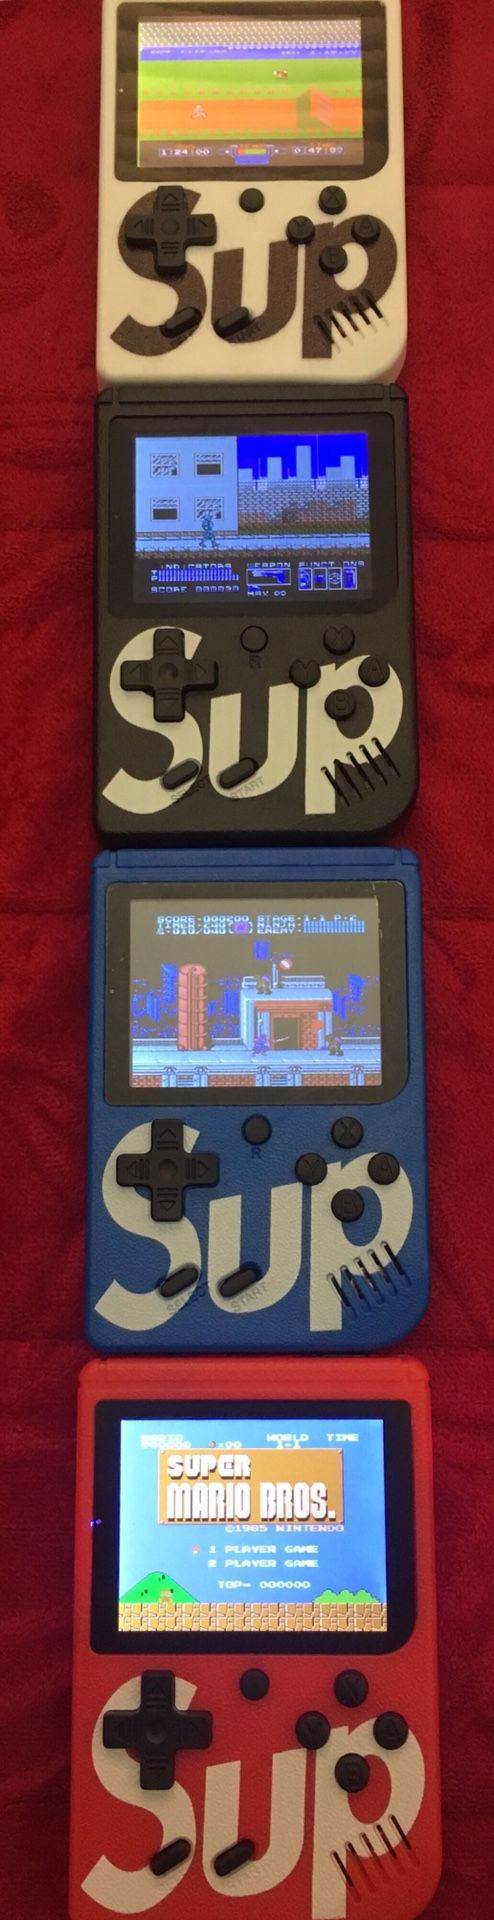 🔥NEW 2020 SUP Edition Handheld Consoles!!🔥